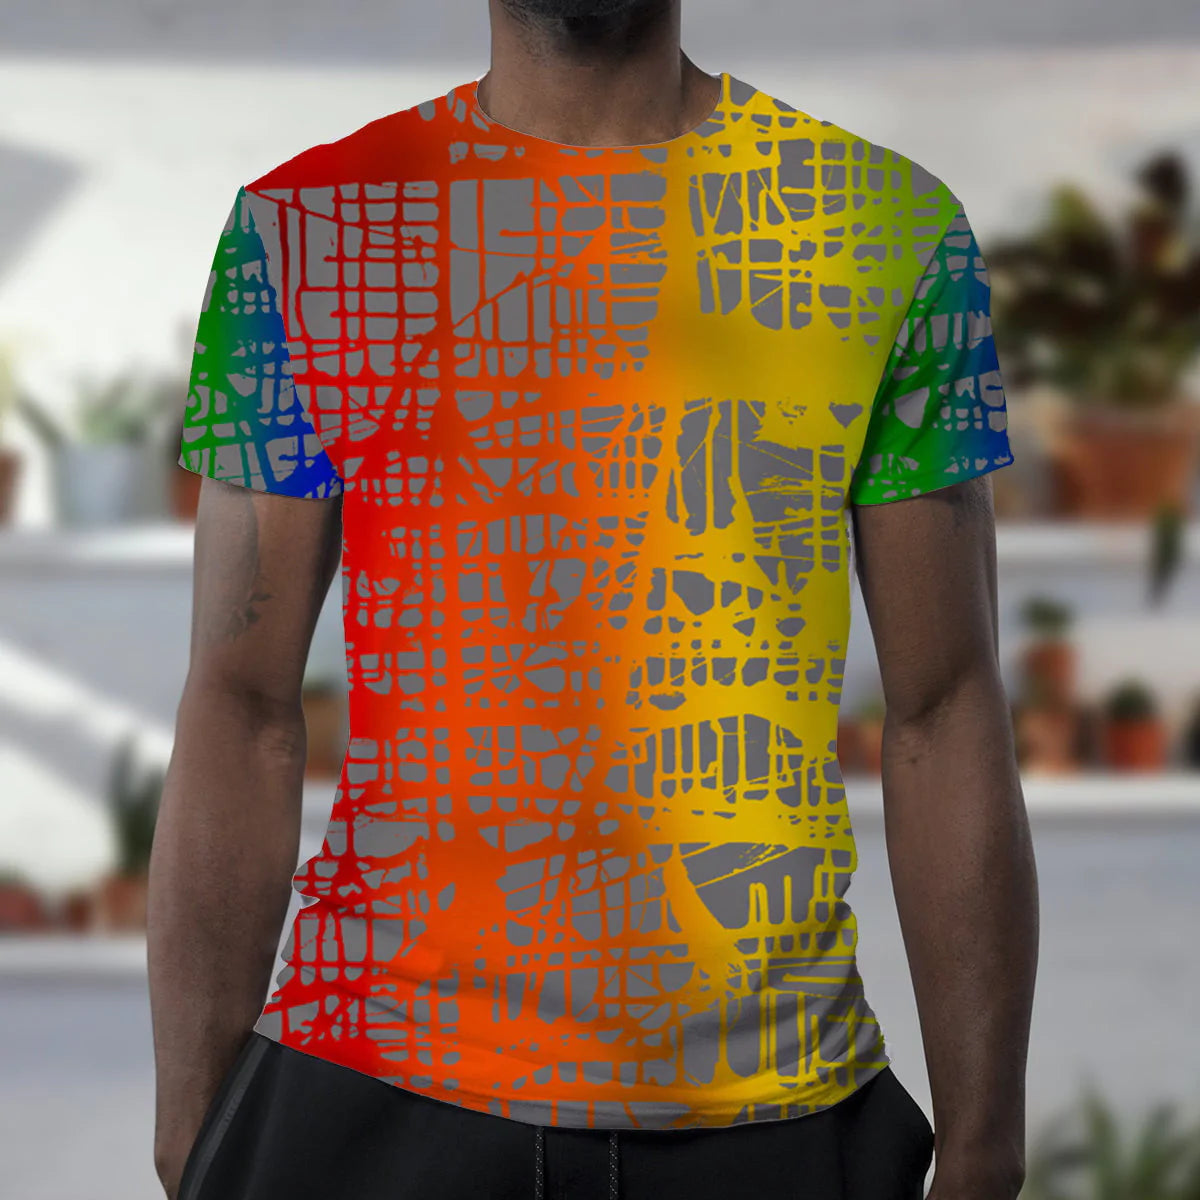  
Inspired by Jumper Maybach’s original, iconic artwork "Dark Matrix”
Celebrate Pride Month all year long.

100% high quality Polyester
uniquely textured
thick microRainbow Matrix, the T-Shirt by Jumper Maybach®T-ShirtMWWJumper Maybach